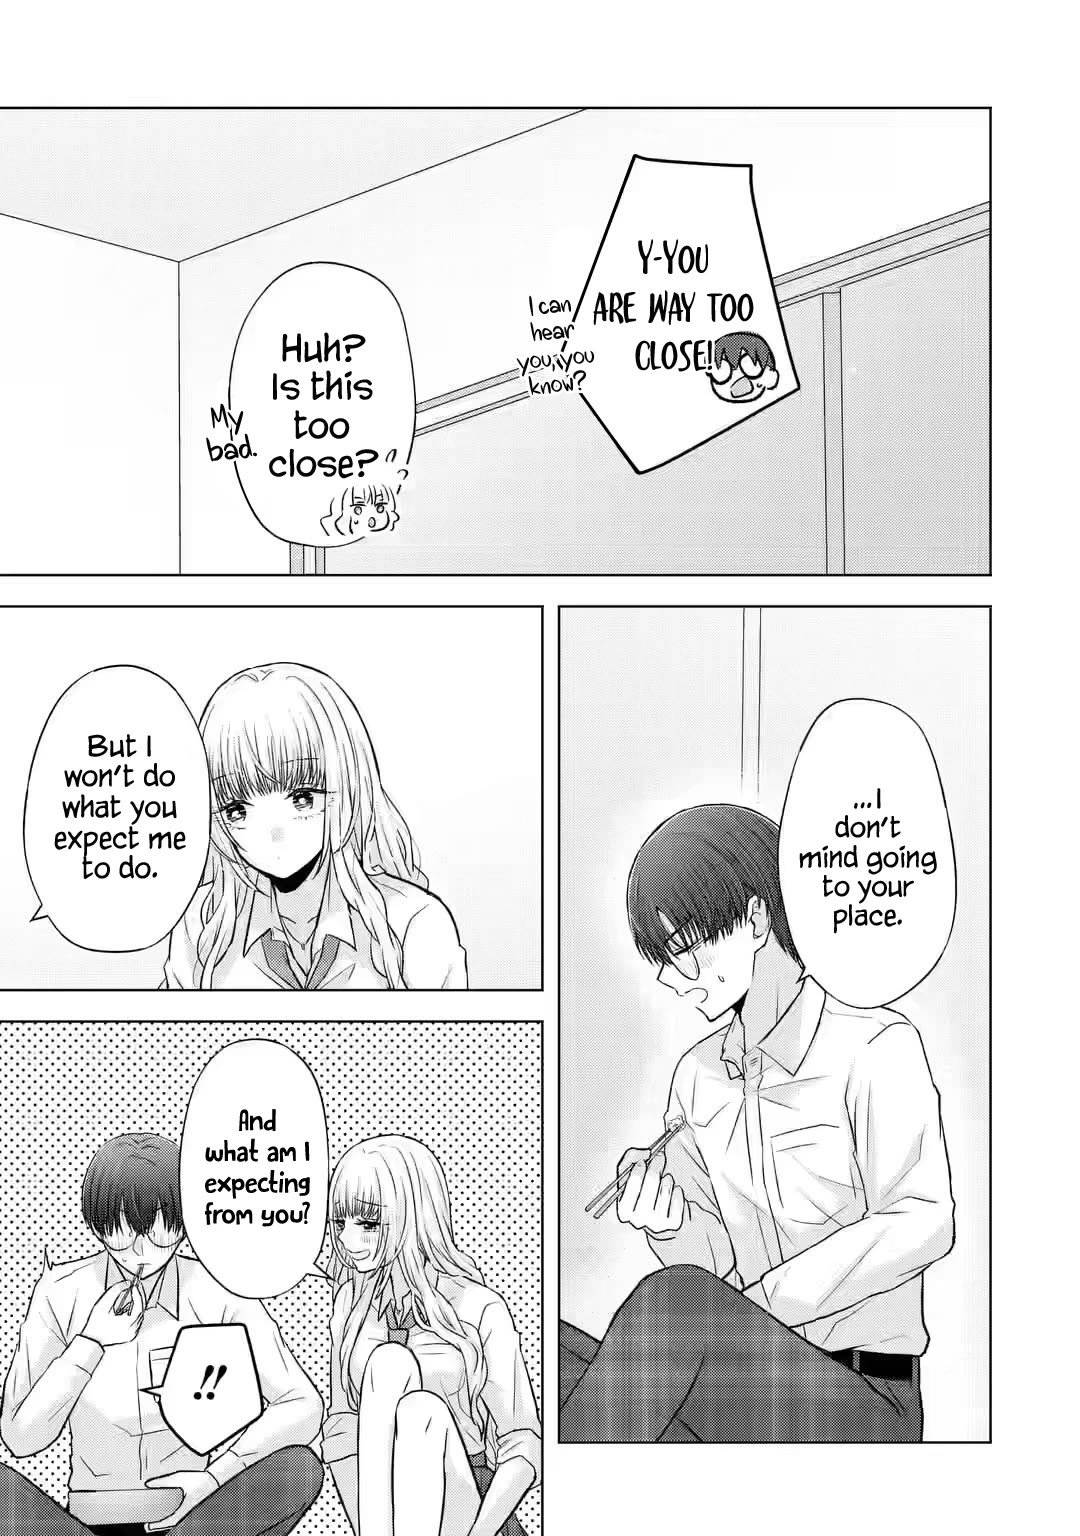 Nanjou-san Wants to Be Held by Me - chapter 4 - #5